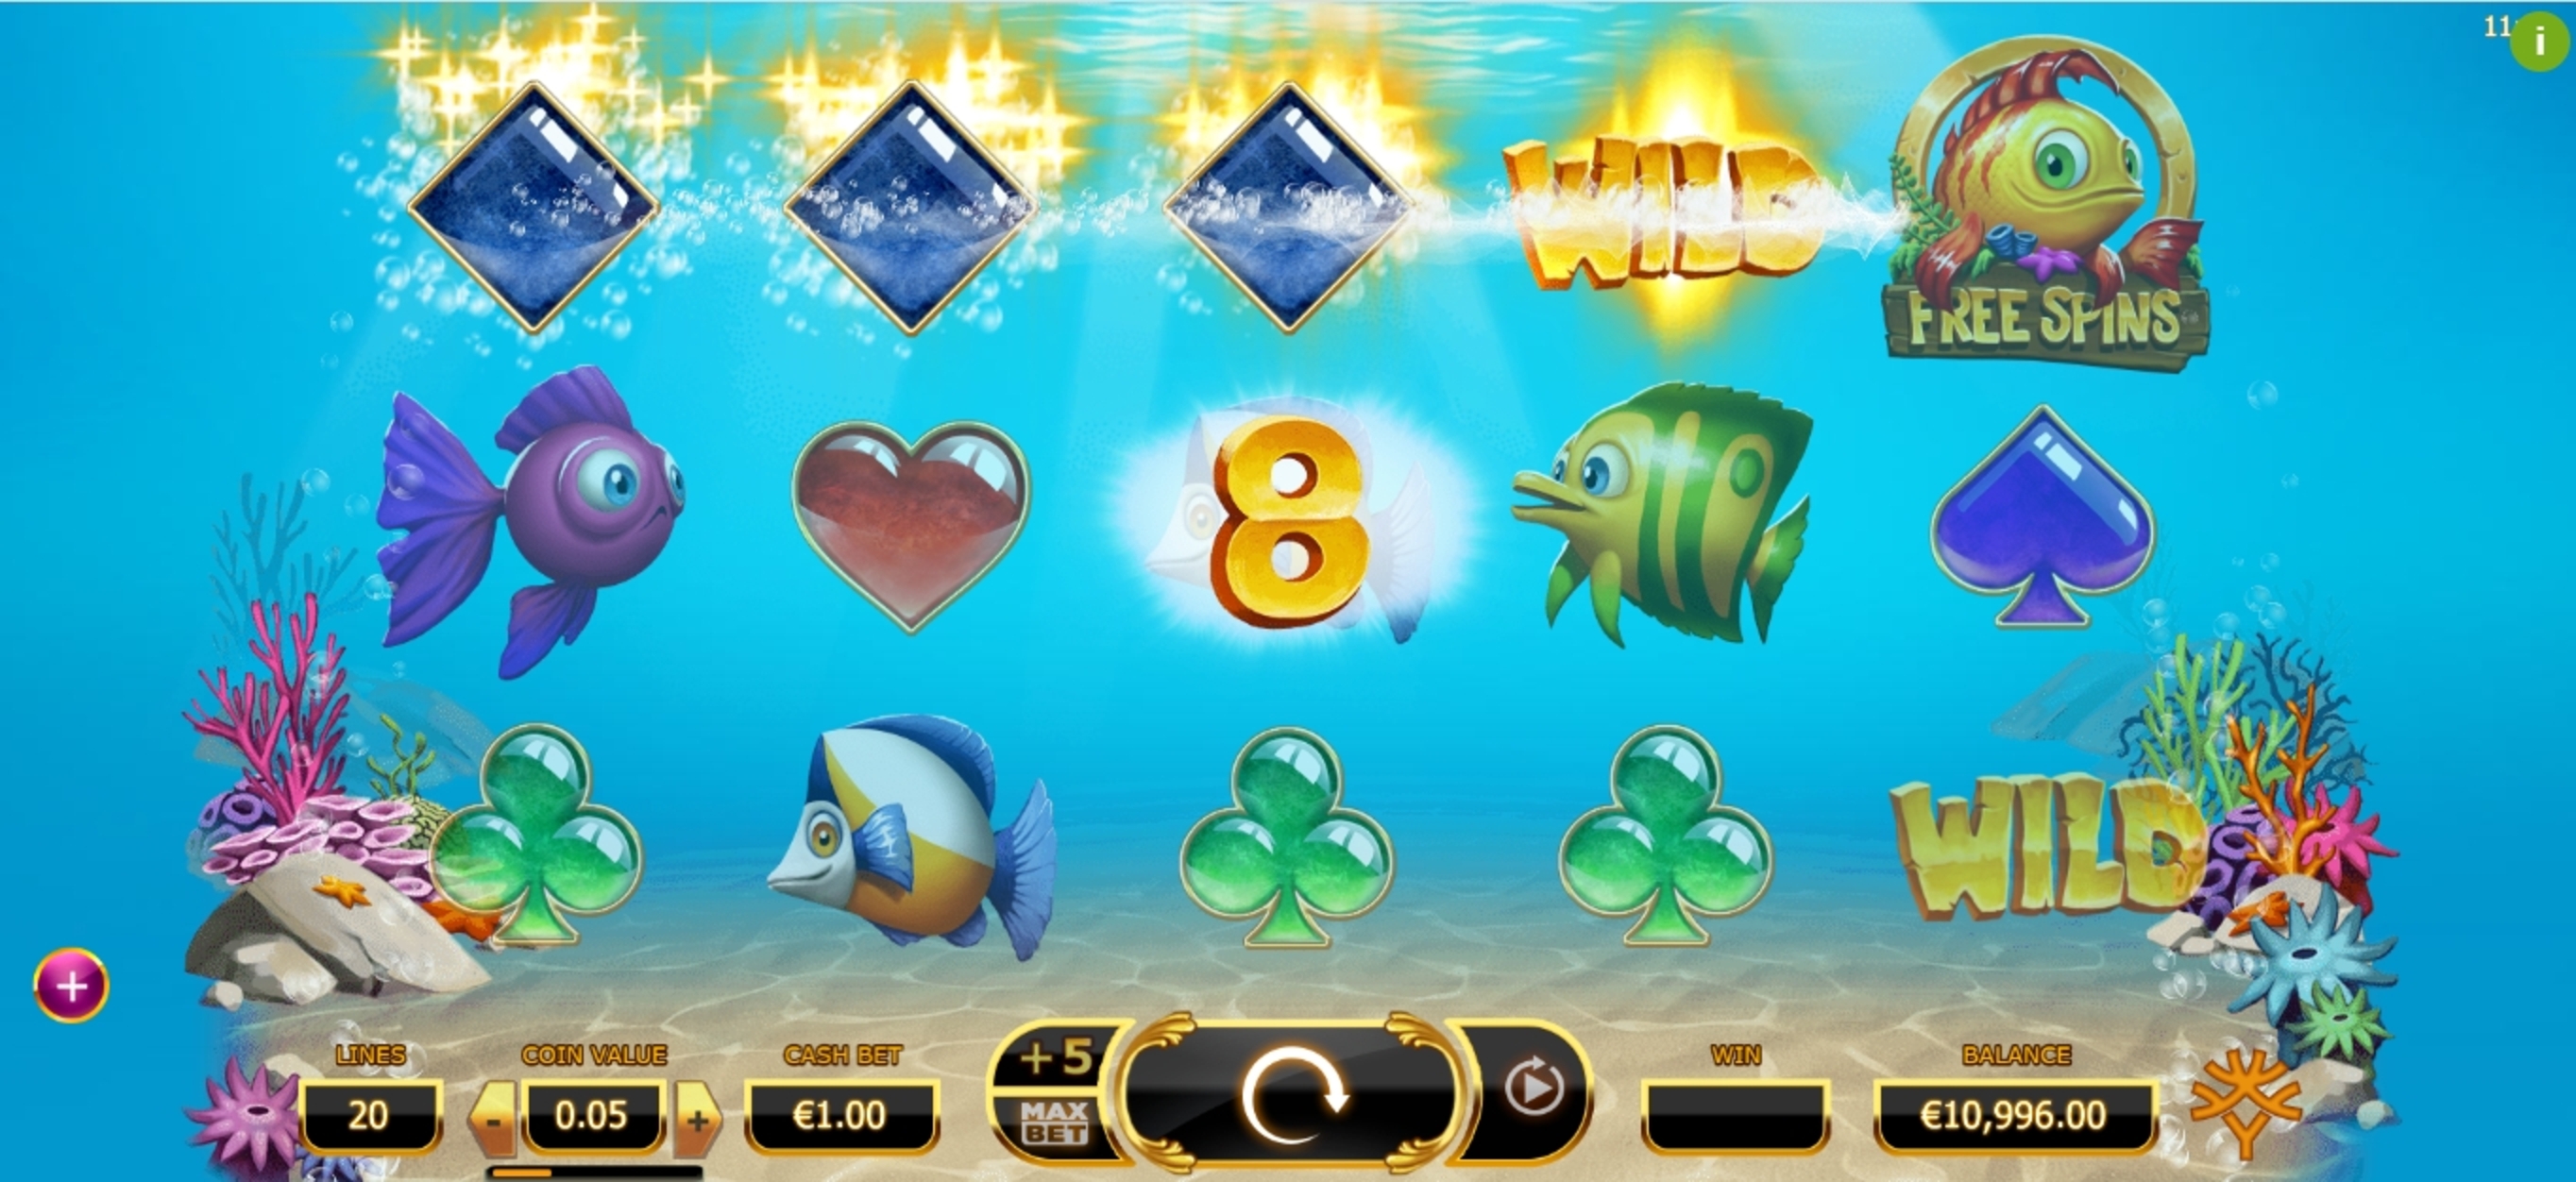 Win Money in Golden Fish Tank Free Slot Game by Yggdrasil Gaming